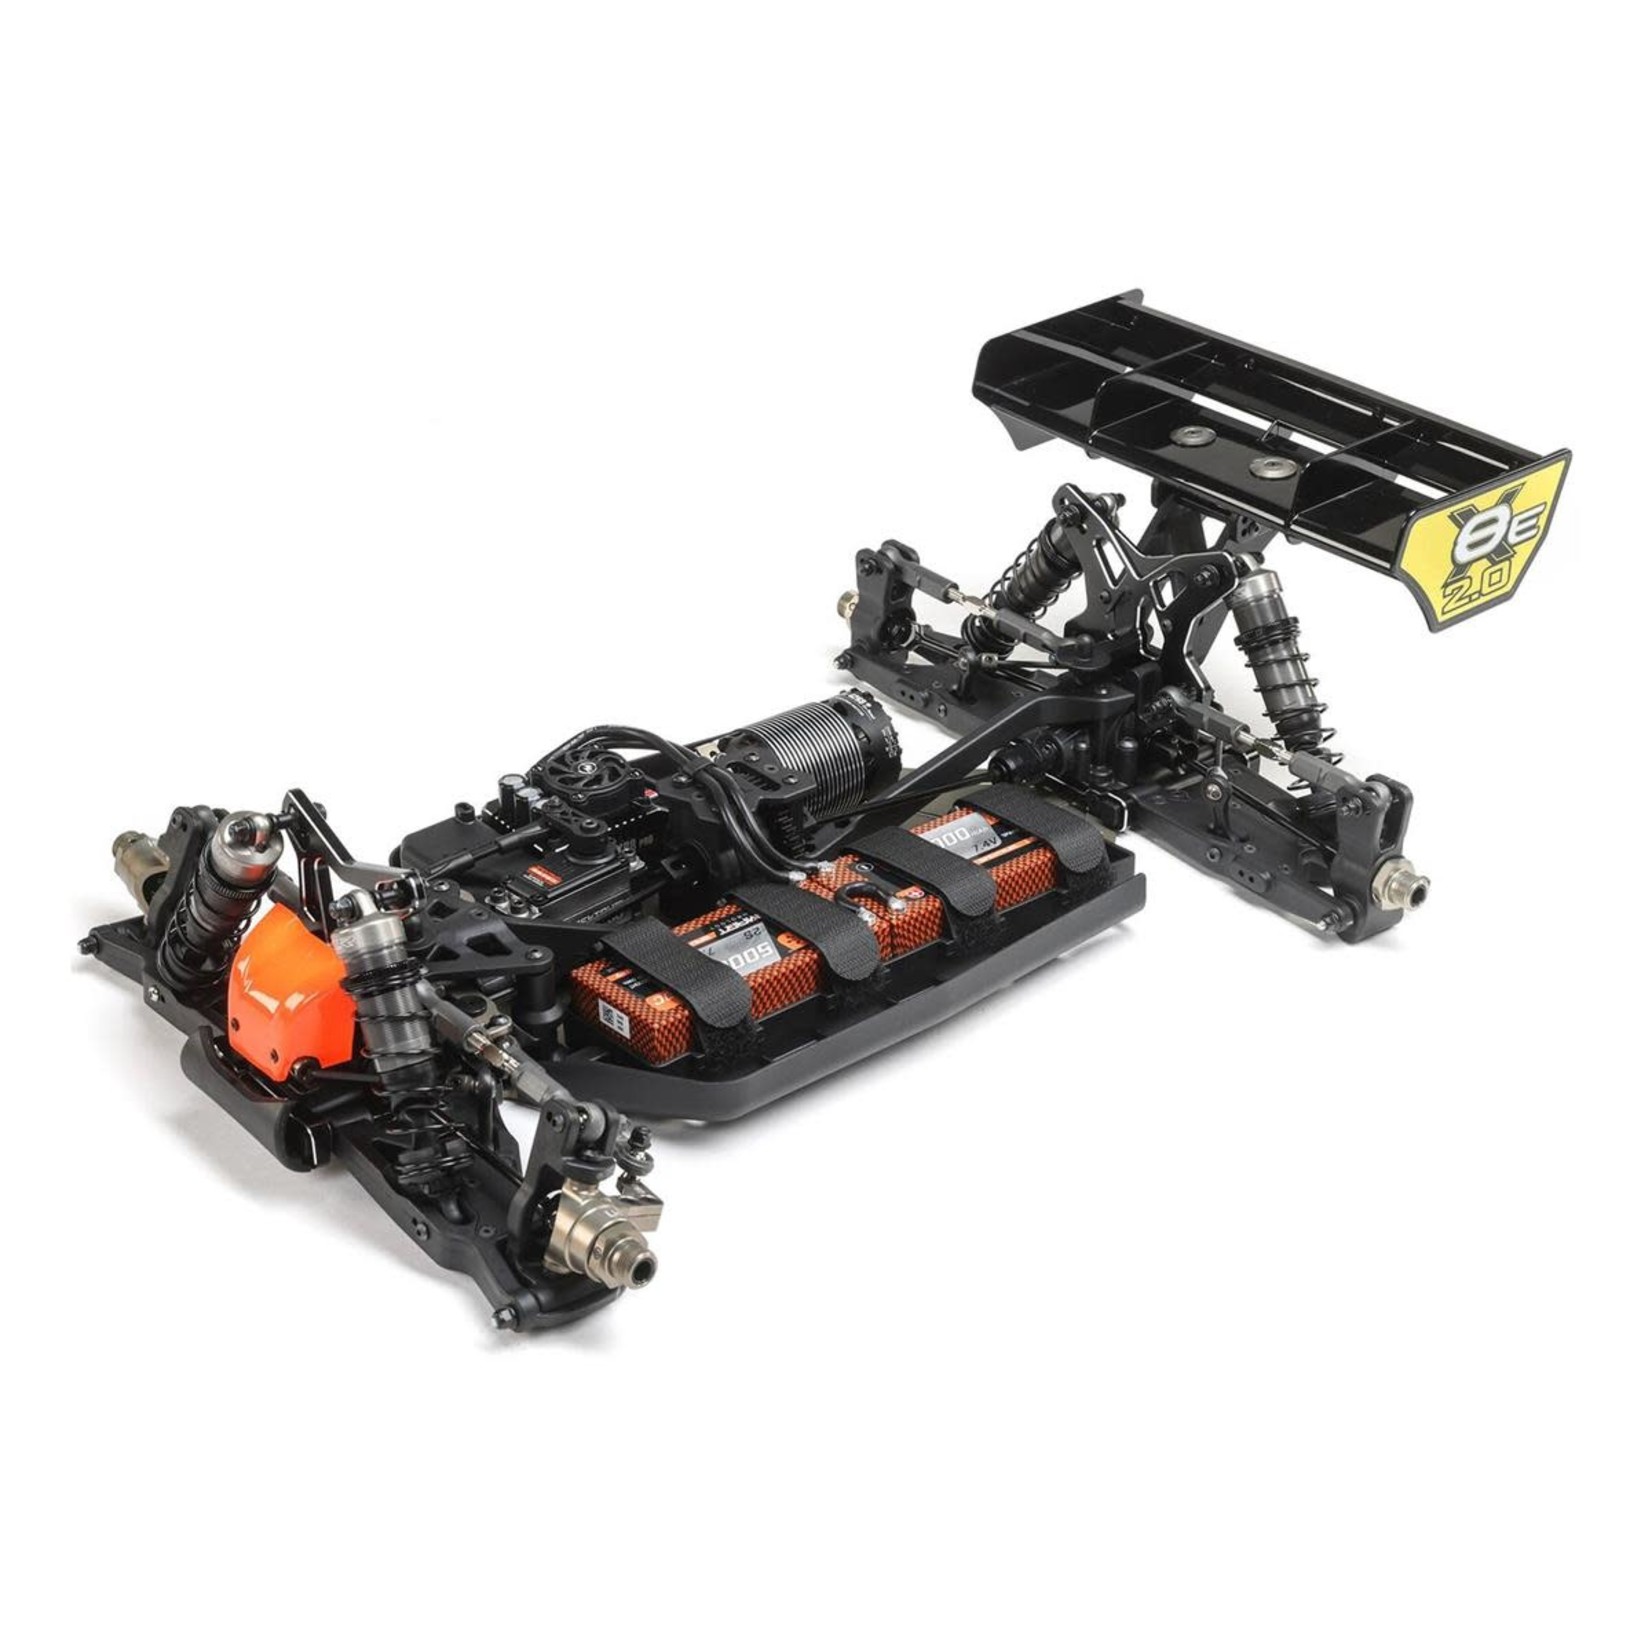 TLR Team Losi Racing 8IGHT-X/E 2.0 Combo Nitro/Electric 1/8 4x4 Off-Road Buggy Kit #TLR04012